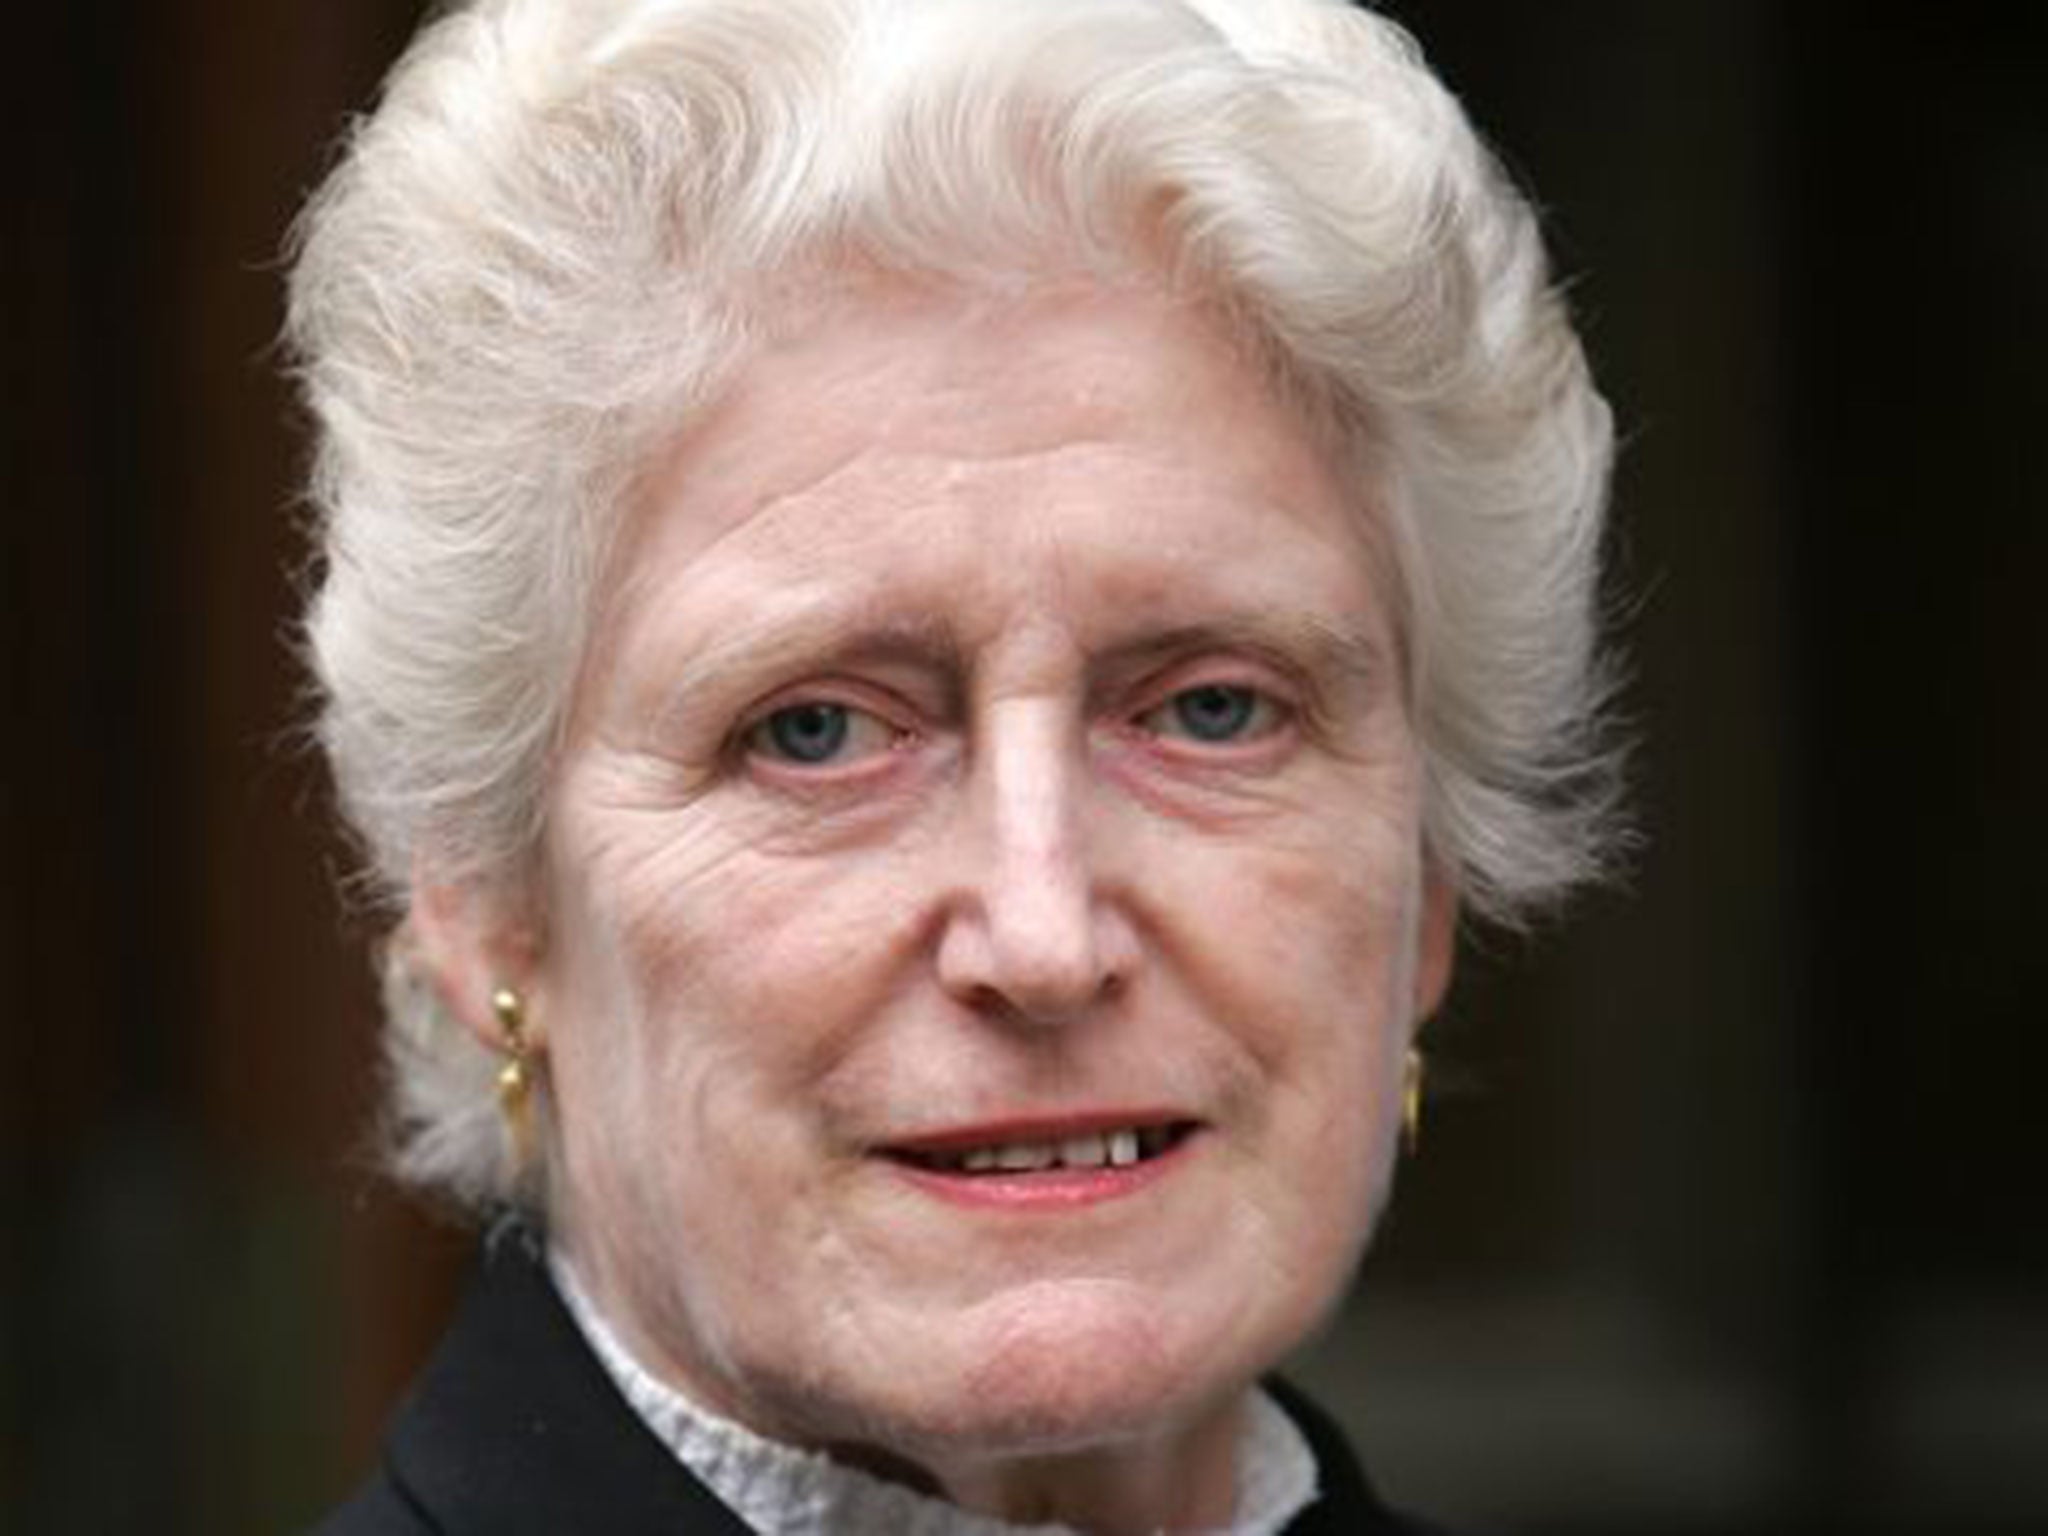 Baroness Butler-Sloss stepped down as chairman of the inquiry into child abuse claims